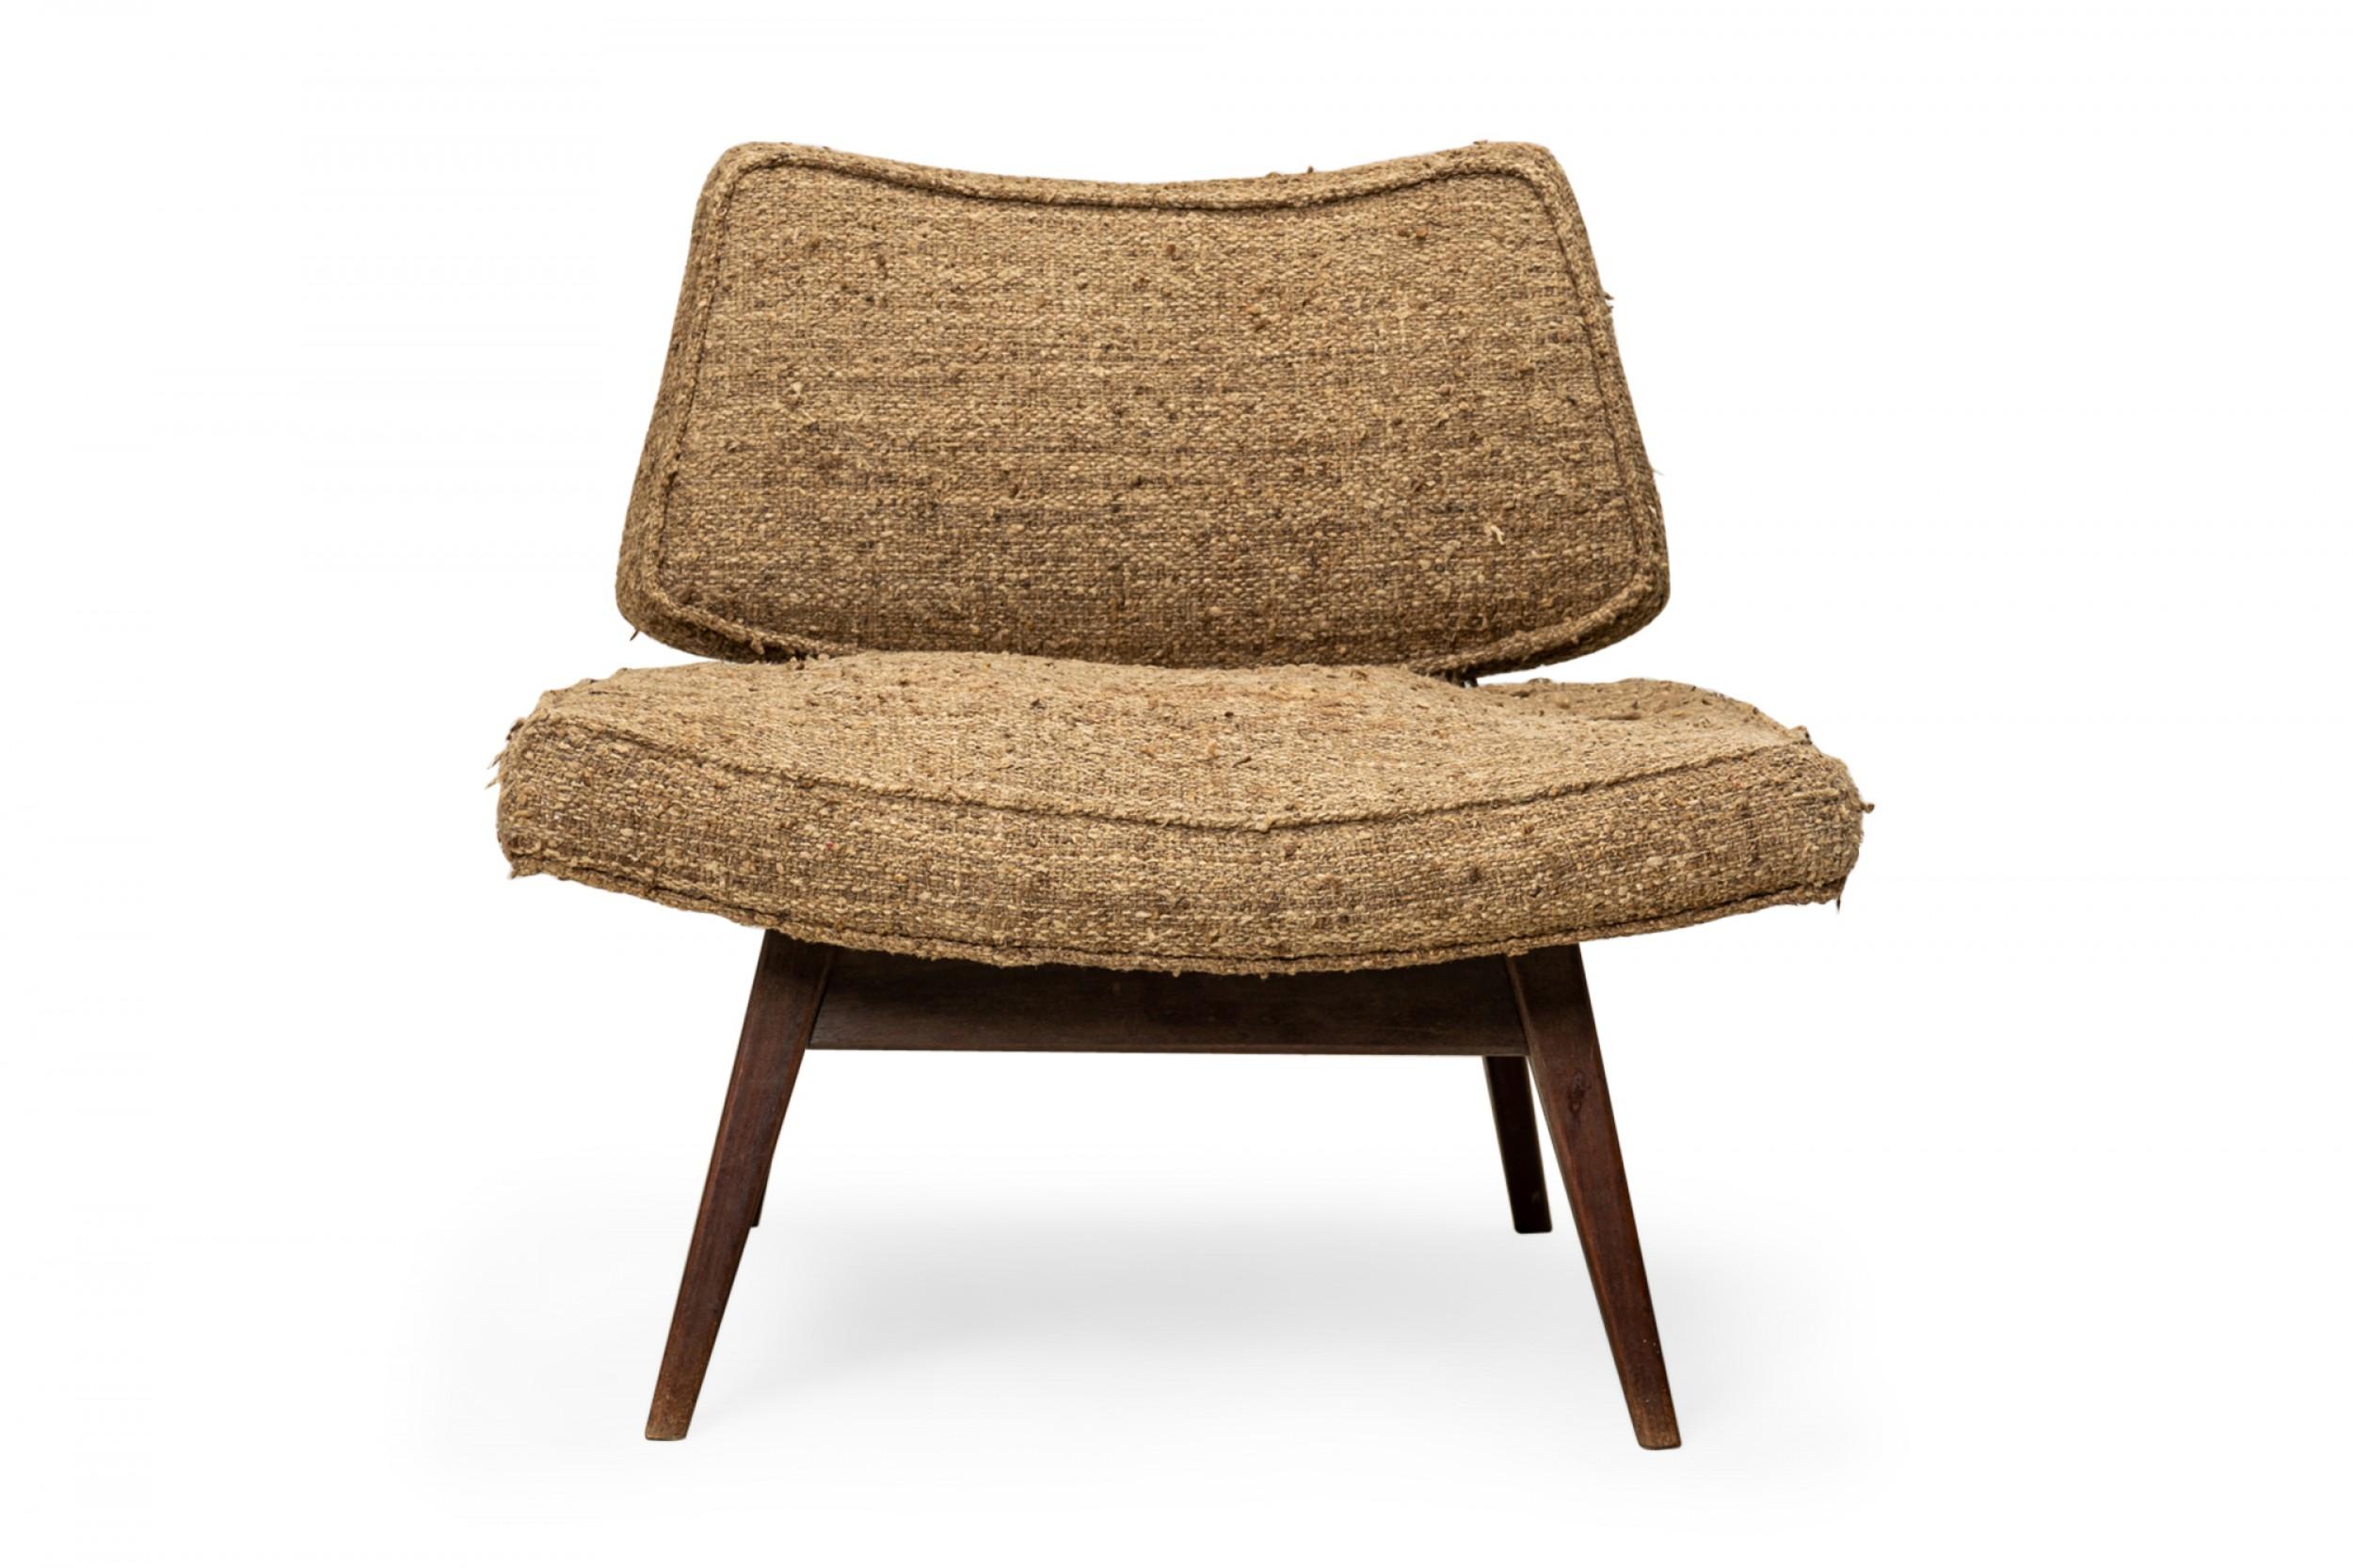 Danish mid-century slipper / side chair with a wide curved seat cushion and smaller low back cushion, upholstered in a beige and brown textured fabric, resting on a teak base with square angled and tapered legs. (JENS RISOM)
 